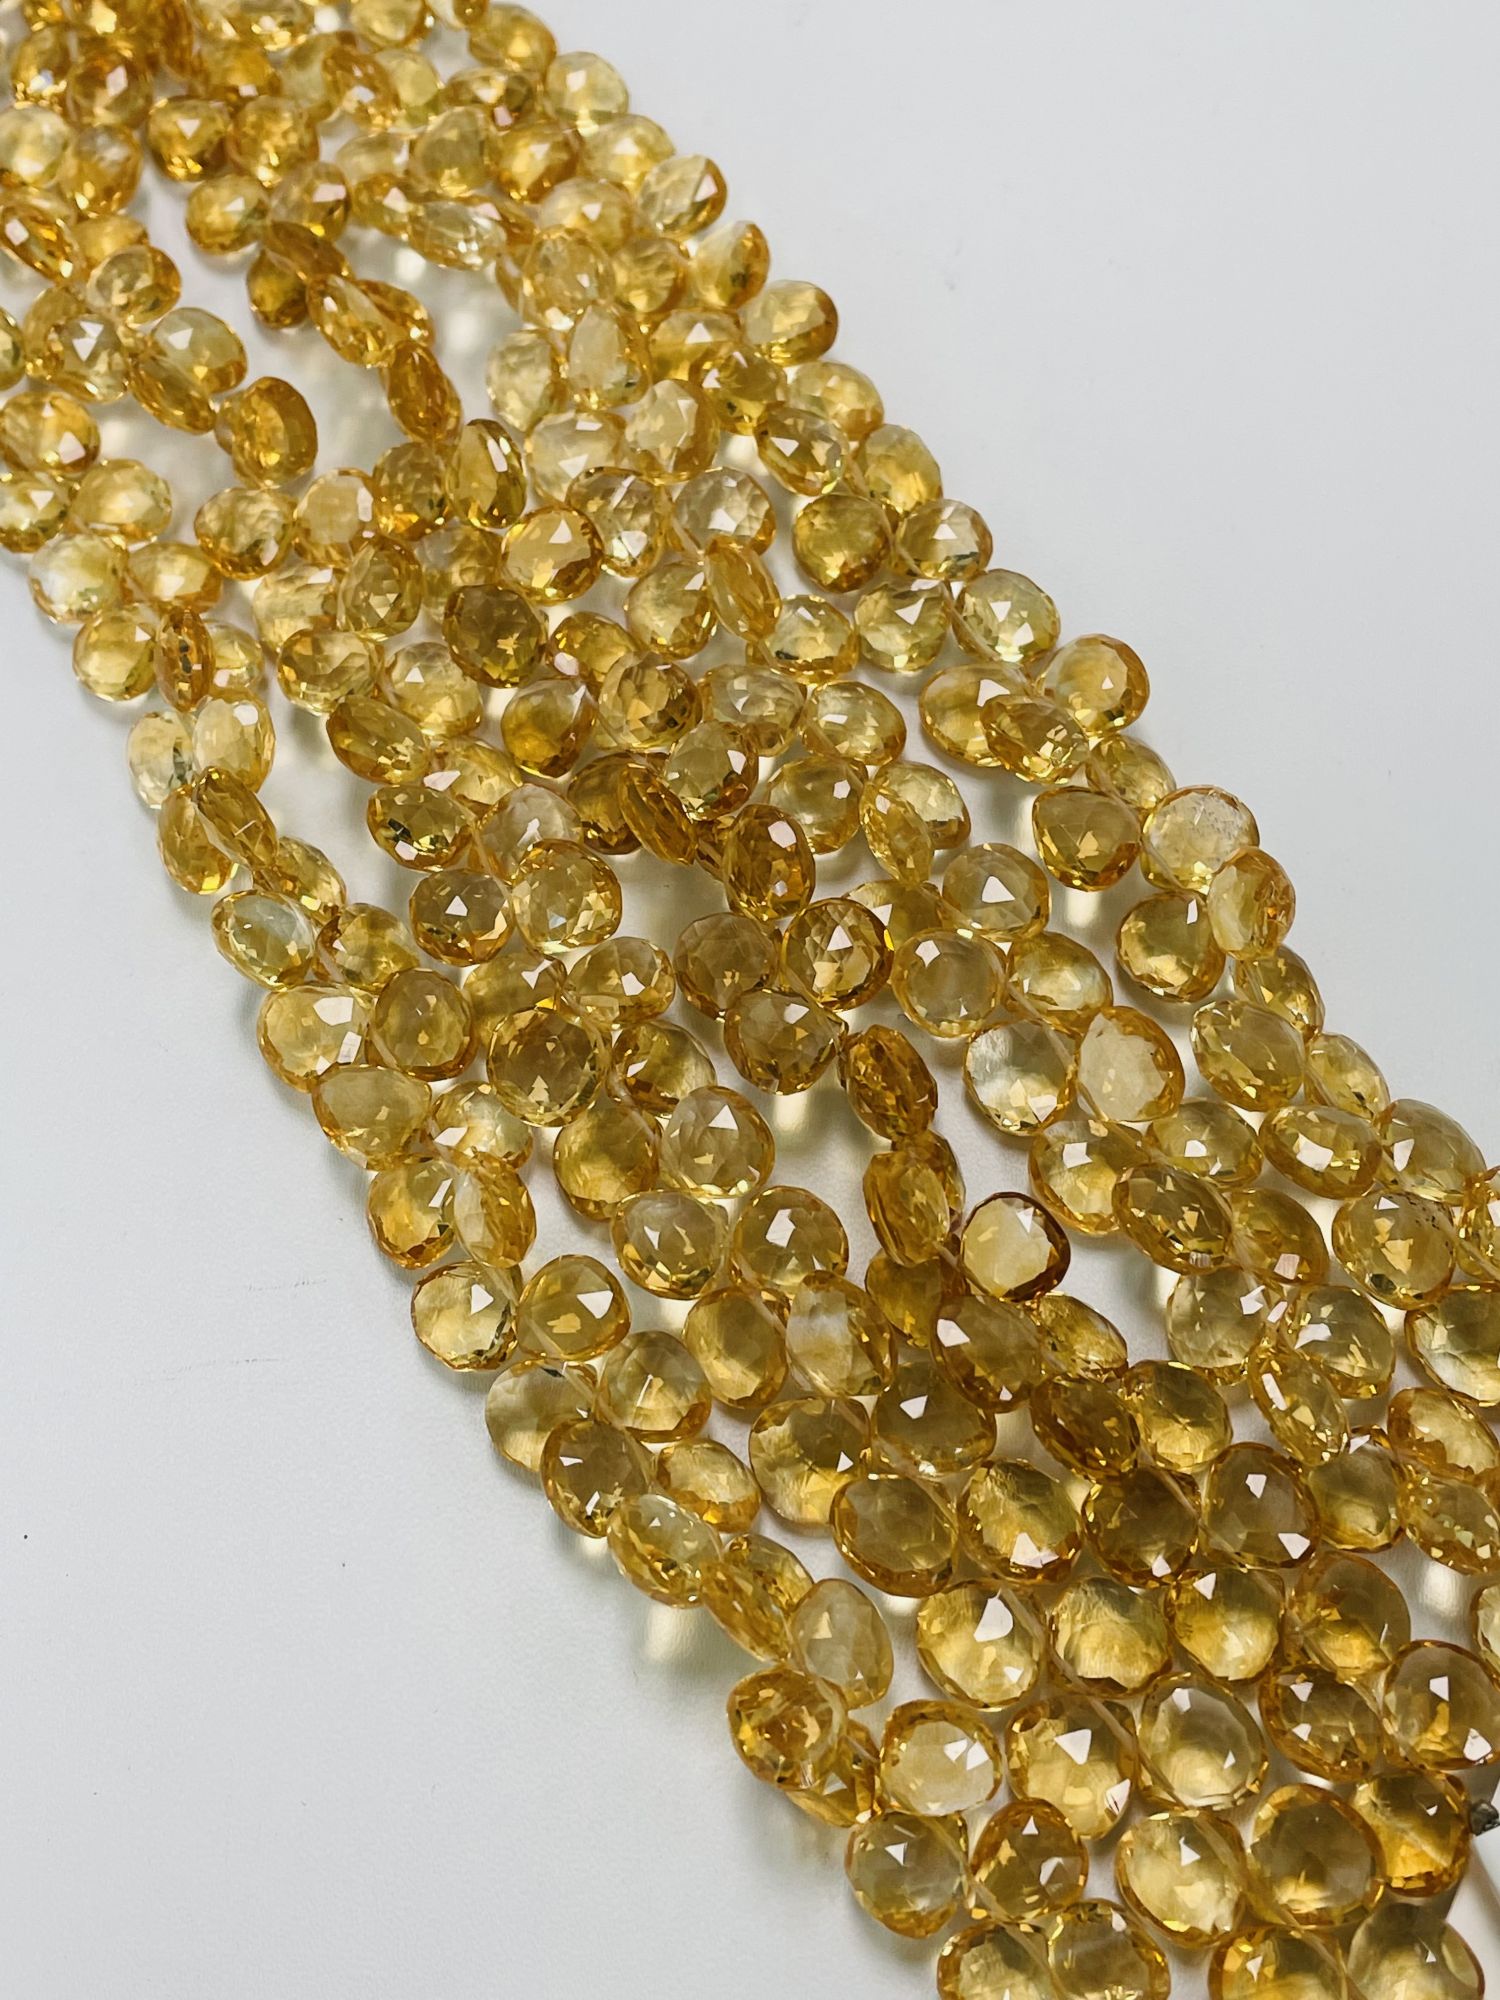 Citrine Heart Faceted